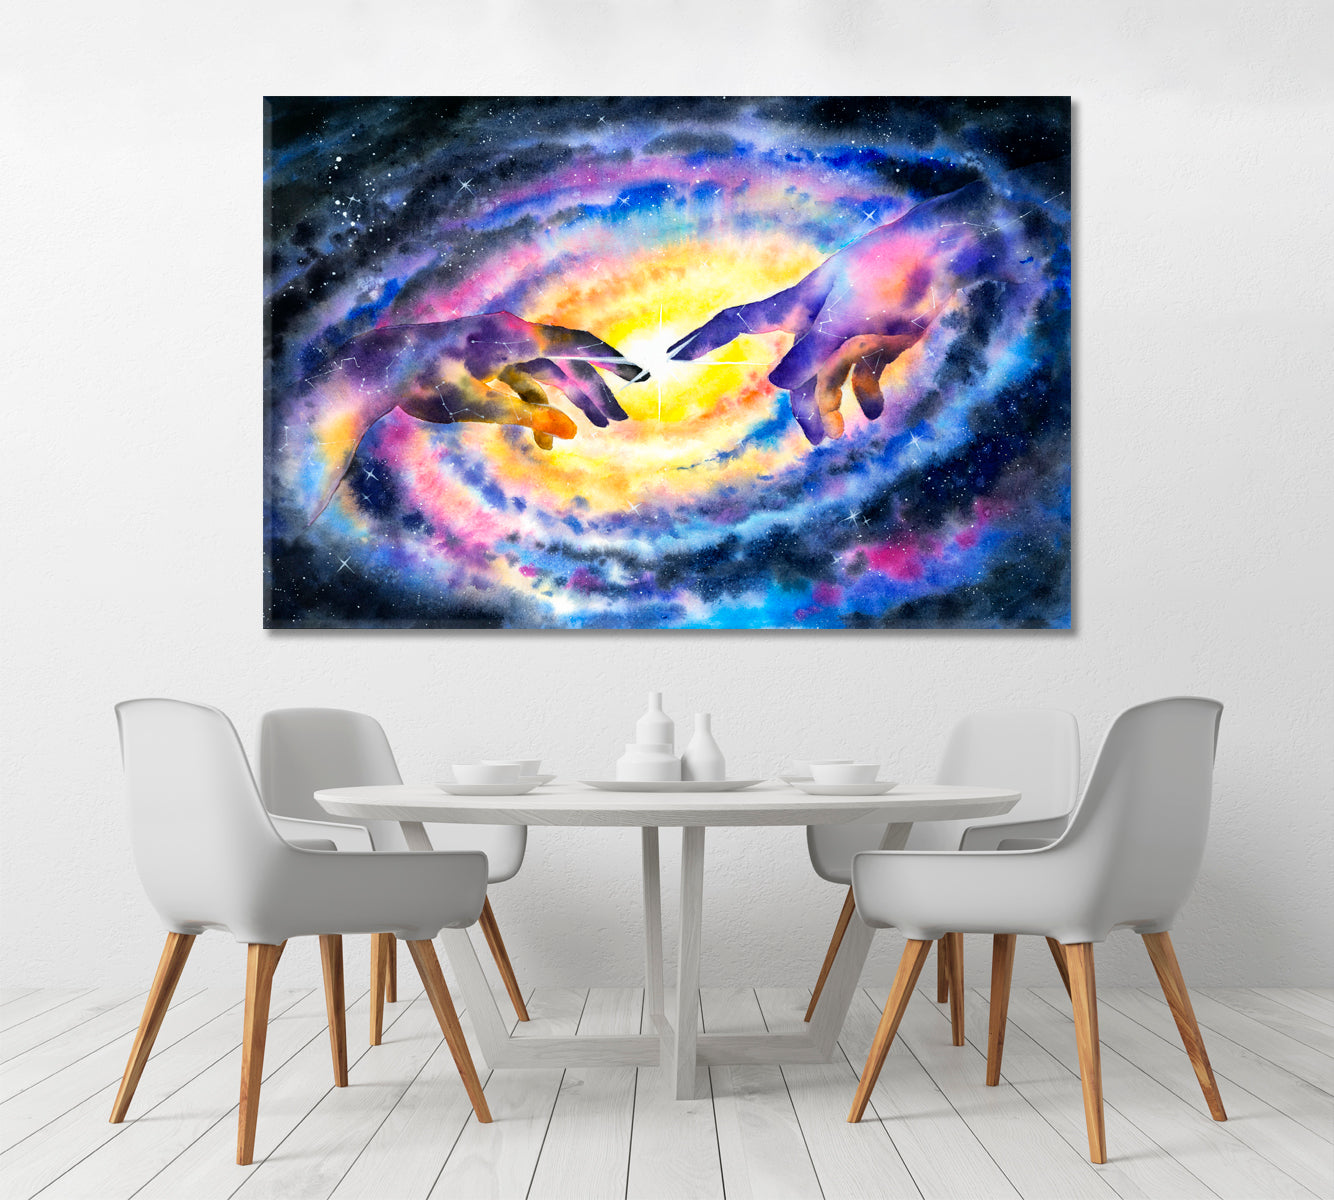 GALAXY Hand of God Creation And Universe Watercolor Artwork Celestial Home Canvas Décor Artesty 1 panel 24" x 16" 